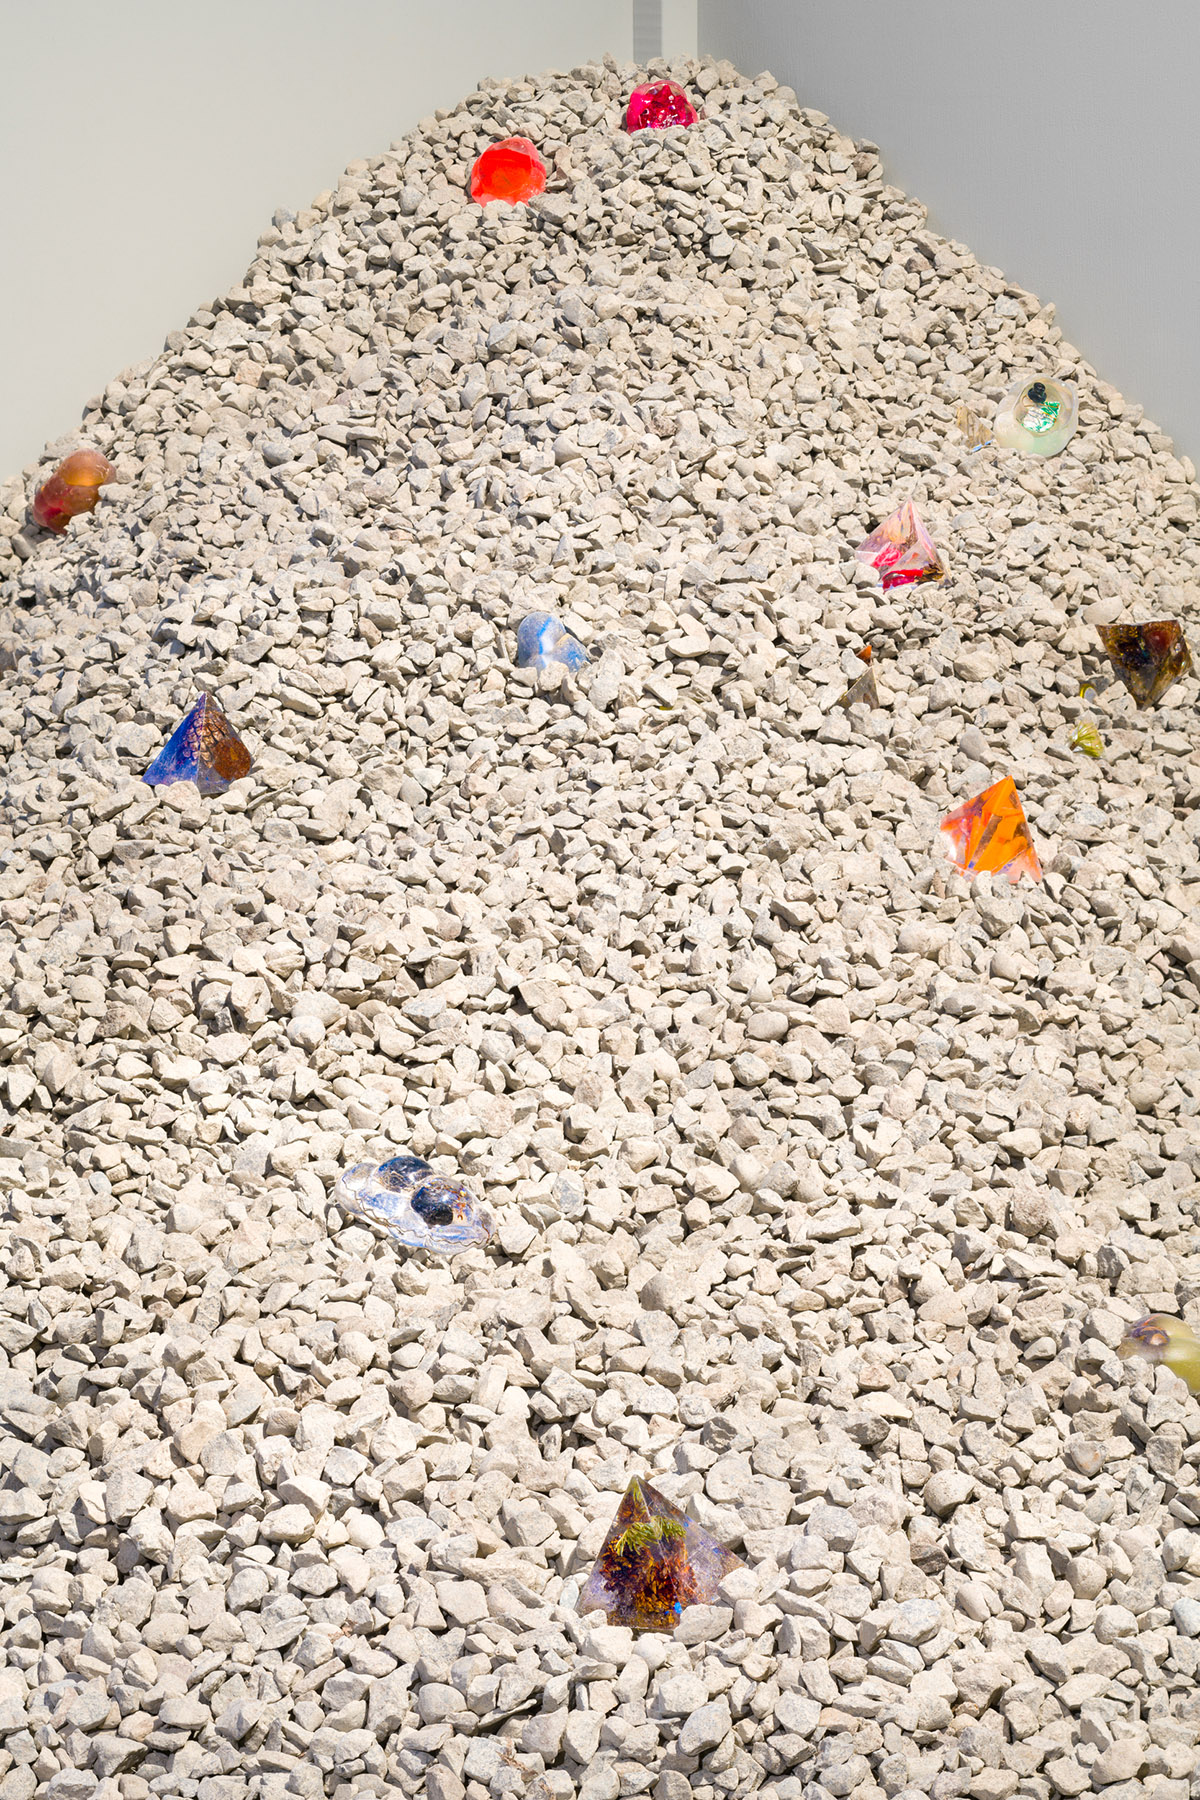 Detail image of participatory artwork, featuring gravel and resin works by E.T. Russian installed at Hedreen Gallery 